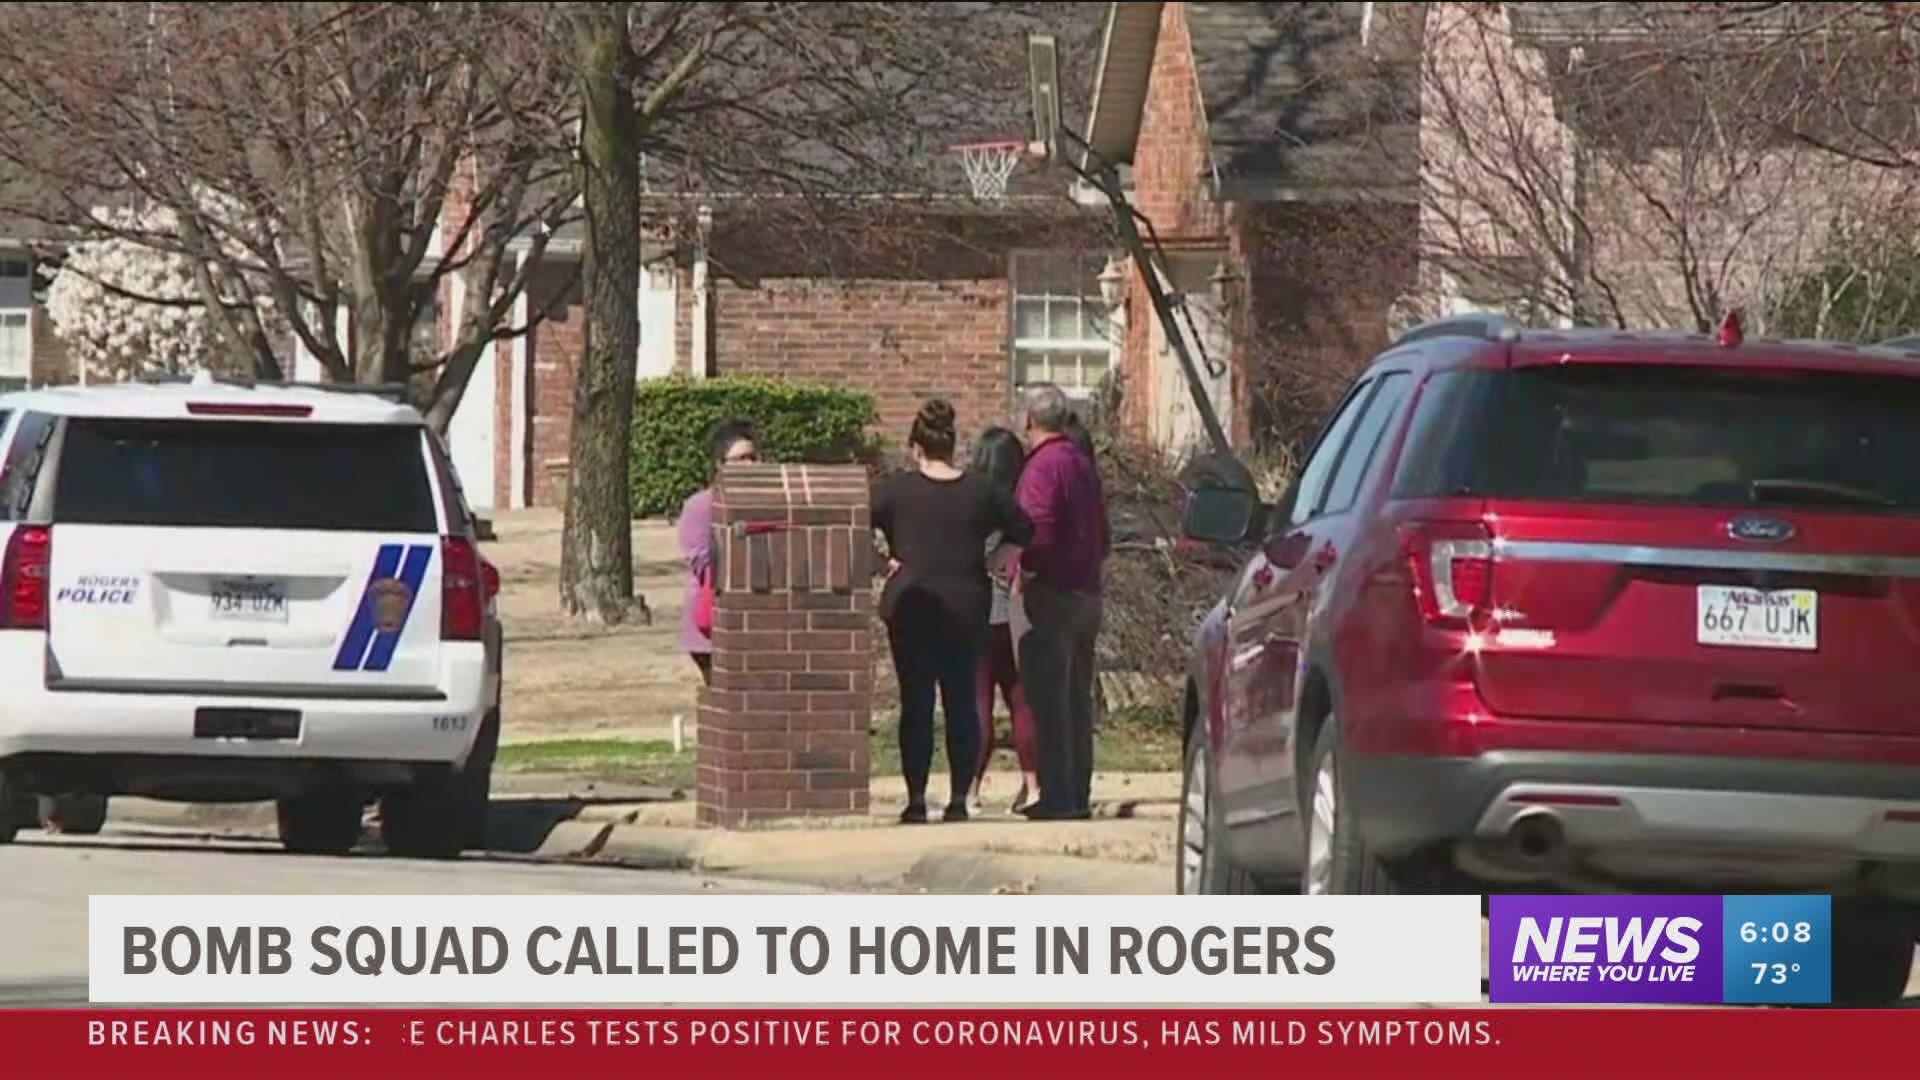 Bomb squad called to home in Rogers